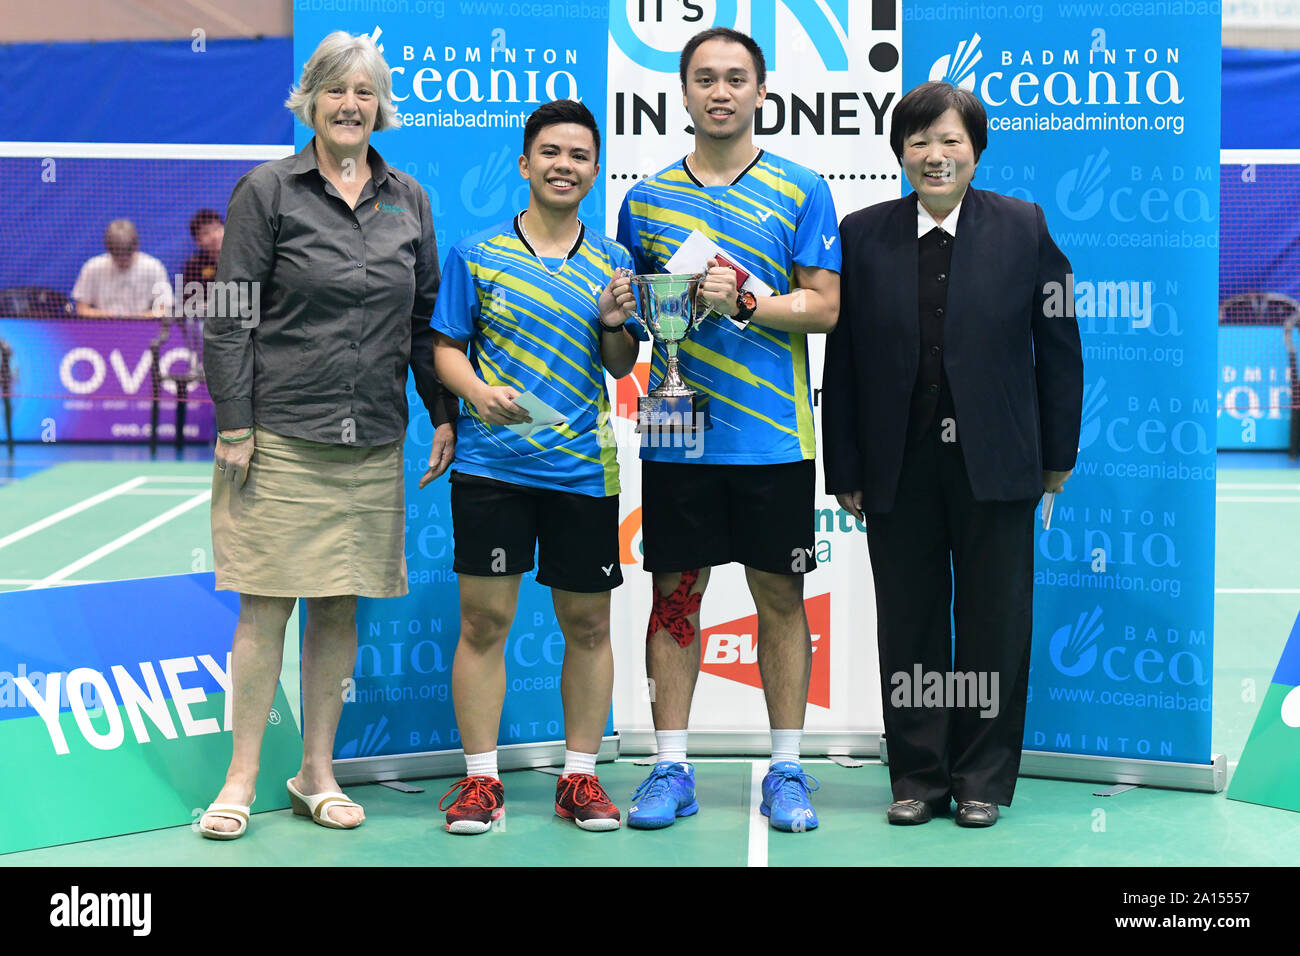 Peter Gabriel Magnaye and Thea Marie Pomar (Philippines) seen during the Mixed Doubles medal awarding ceremony of the 2019 Sydney International, Magnaye and Pomar won the gold medal by beating Oliver Leydon-Davis and Anona Pak (New Zealand) 21-9, 21-19,  from left to right: President for Oceania Badminton Confederation Geraldine Brown, Pomar, Magnaye and Badminton NSW President Carolyn Toh. Stock Photo